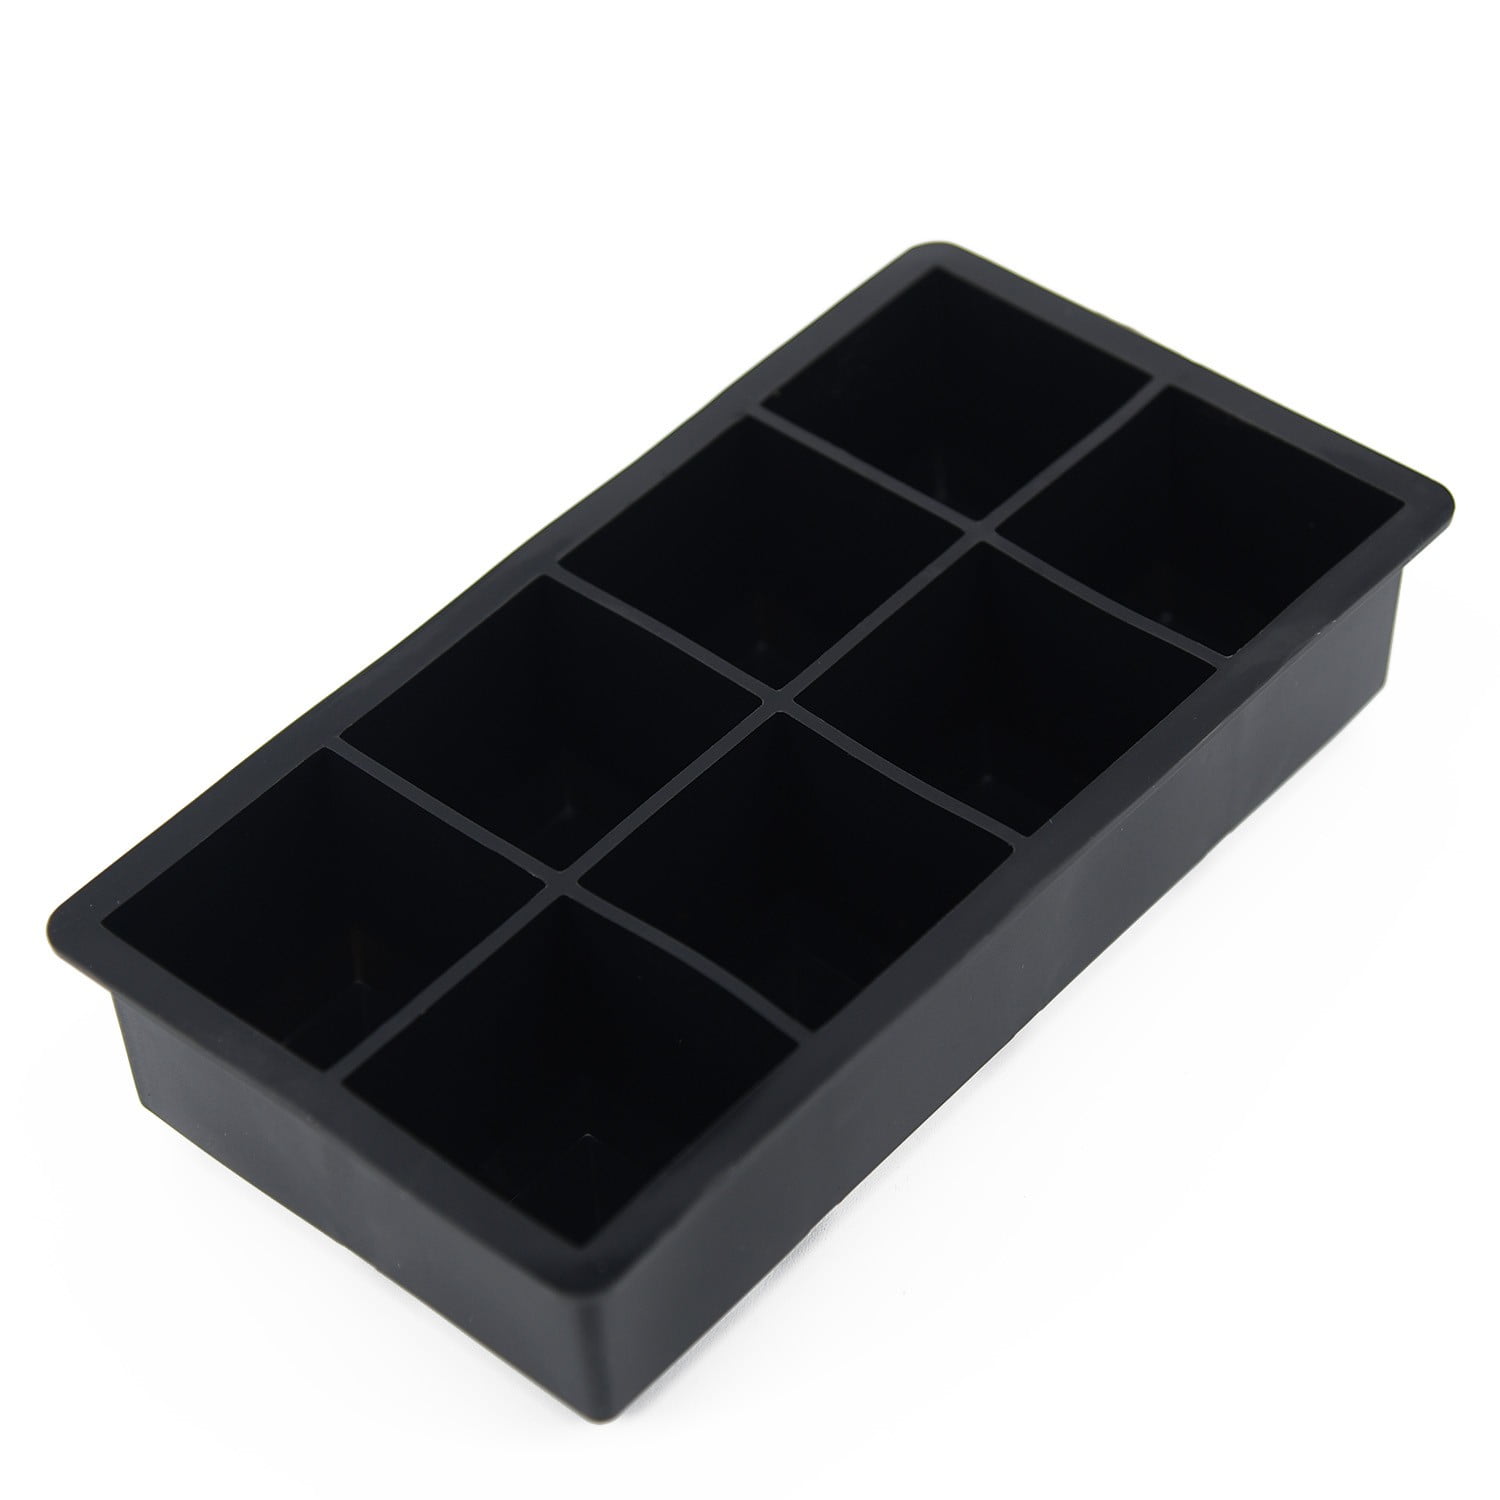 Big Giant Jumbo King Size Large Ice Cube Square Tray Mold Mould NEW S 